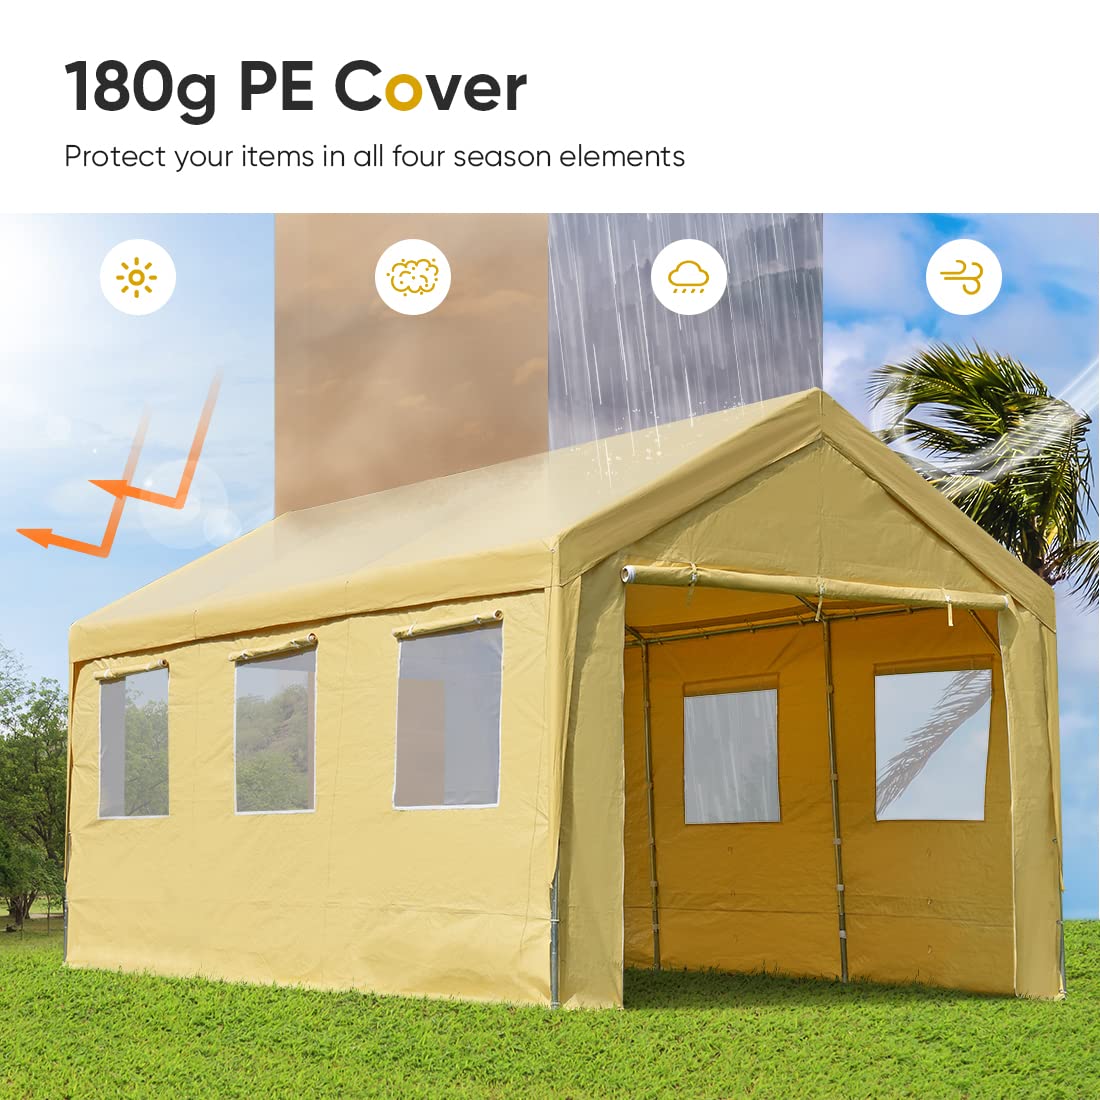 ADVANCE OUTDOOR 12x20 ft Heavy Duty Adjustable Carport with 6 Roll-up Ventilated Windows & Removable Sidewalls Car Canopy Garage Boat Shelter Party Tent, Peak Height from 9.5ft to 11ft, Beige Yellow 12'x20'